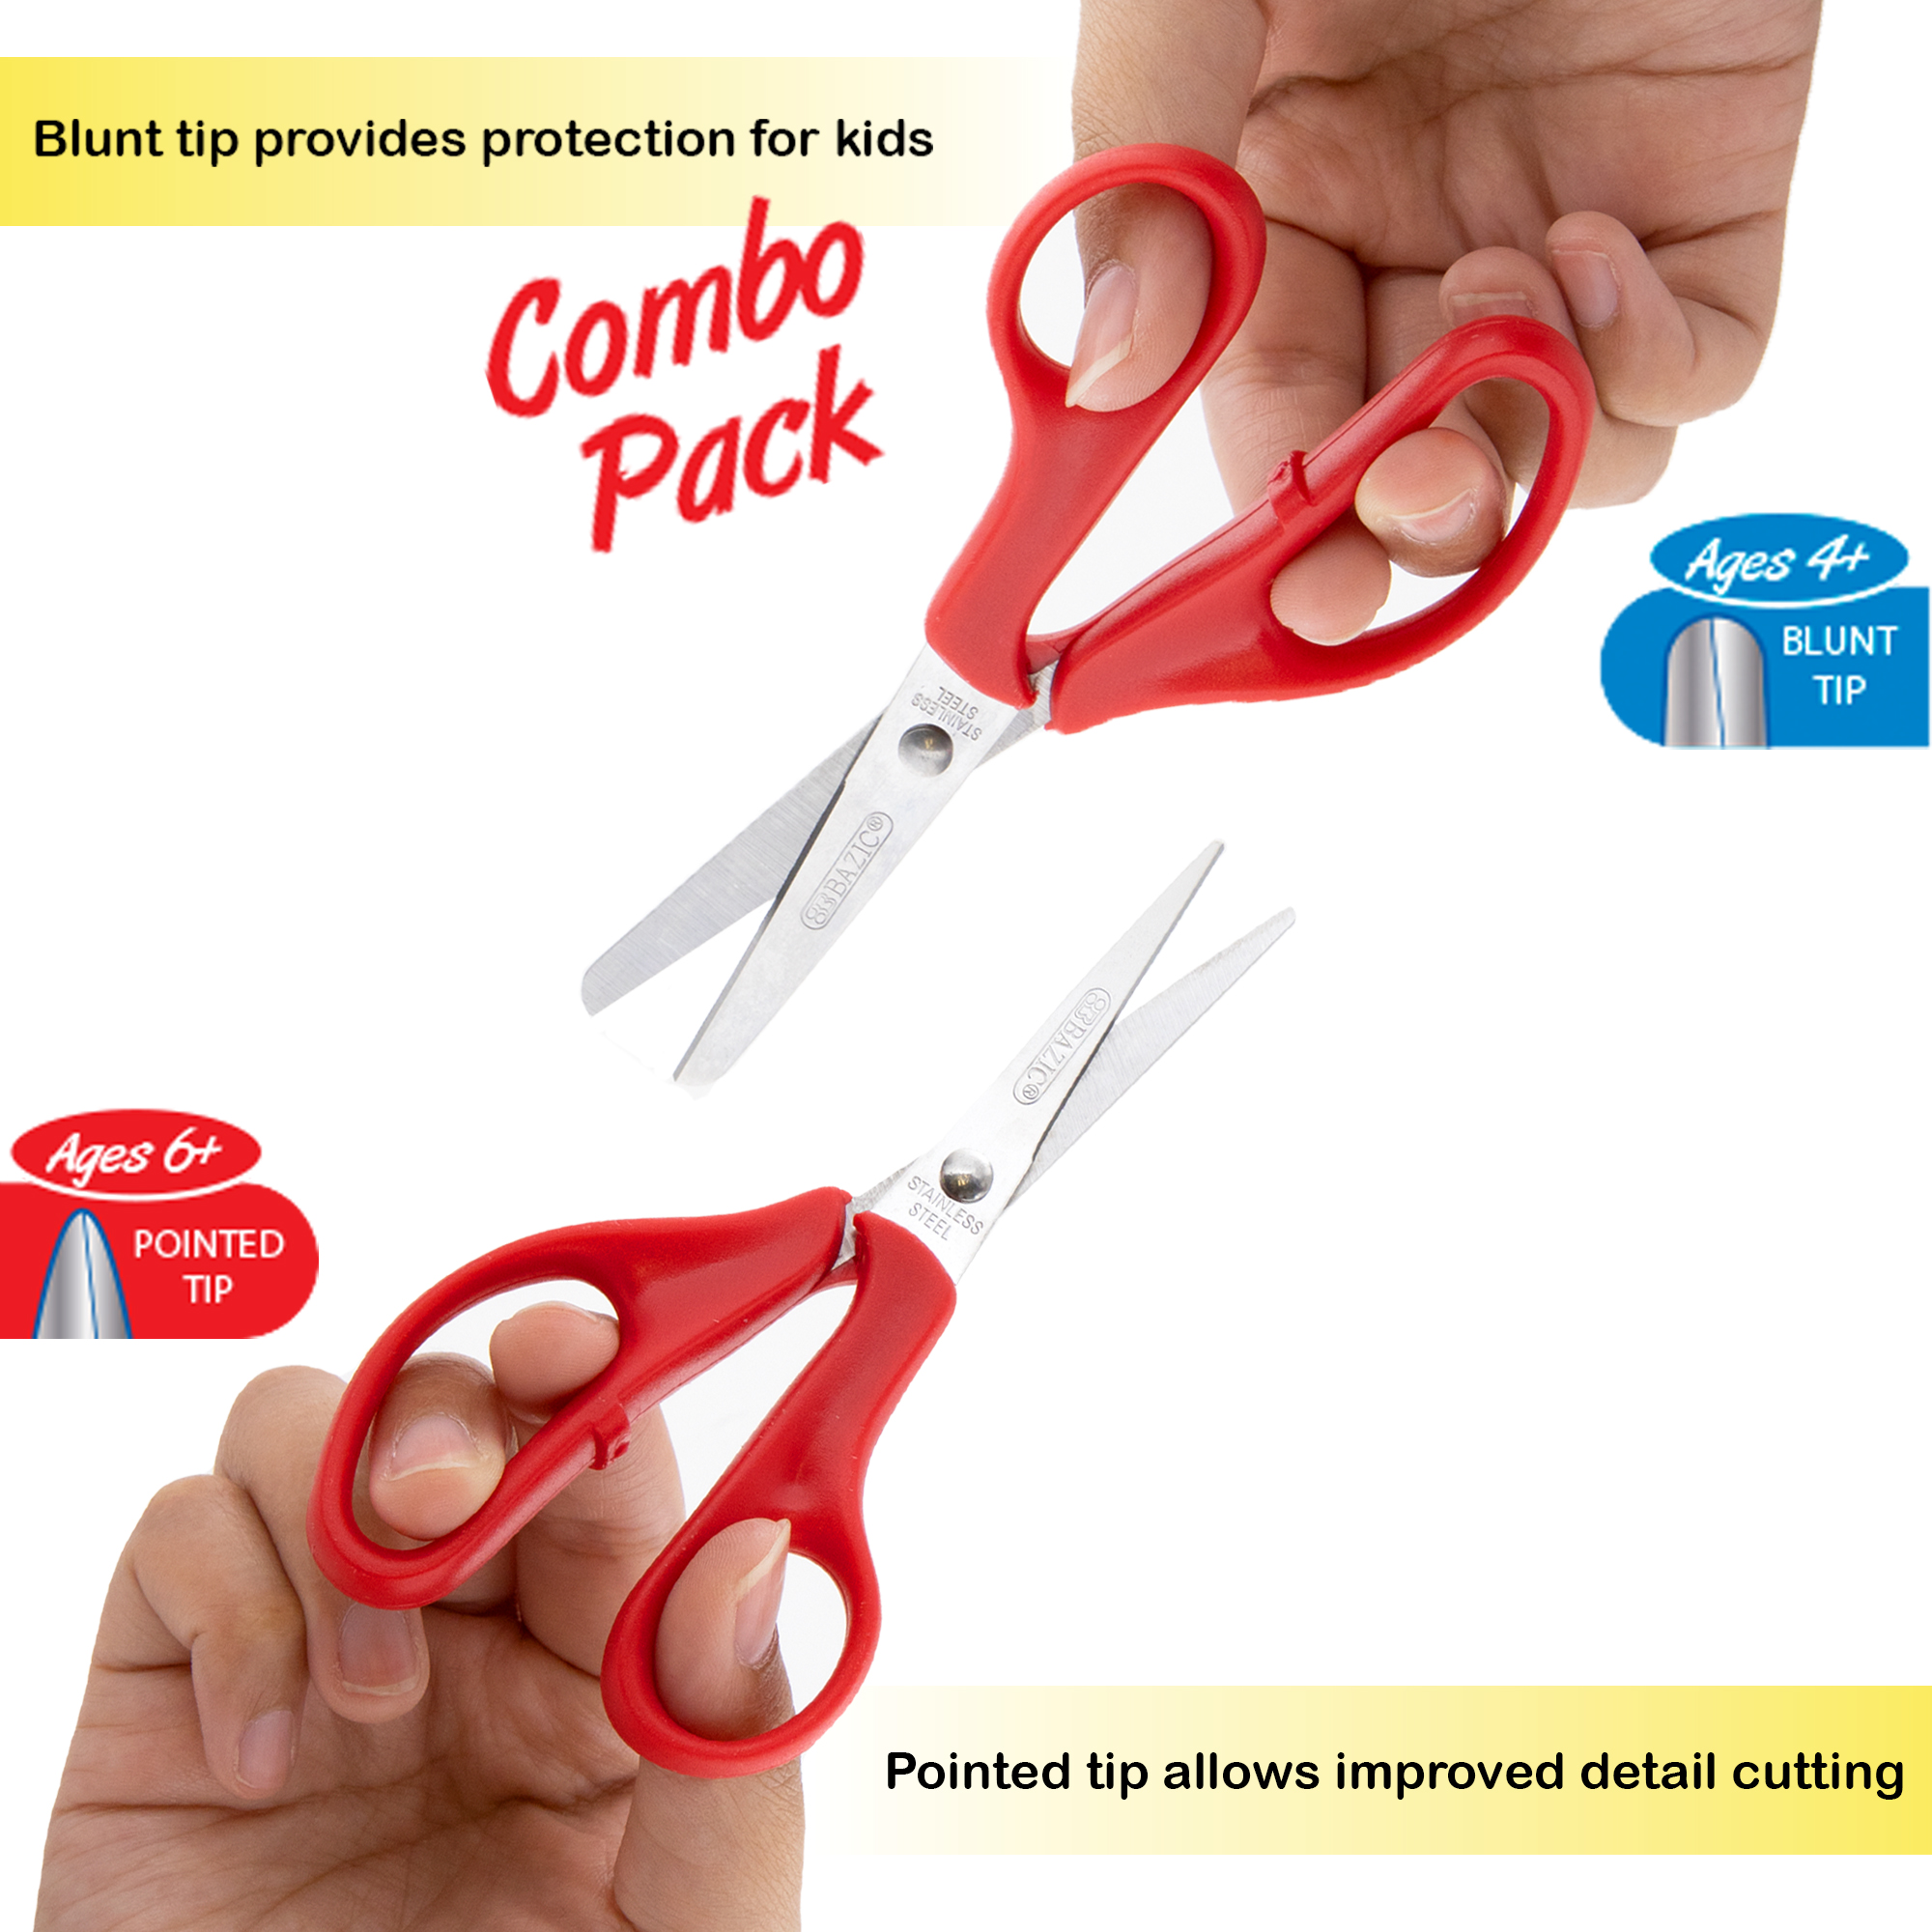 BAZIC 5 1/2 Kids Safety Scissors (2/Pack) Bazic Products